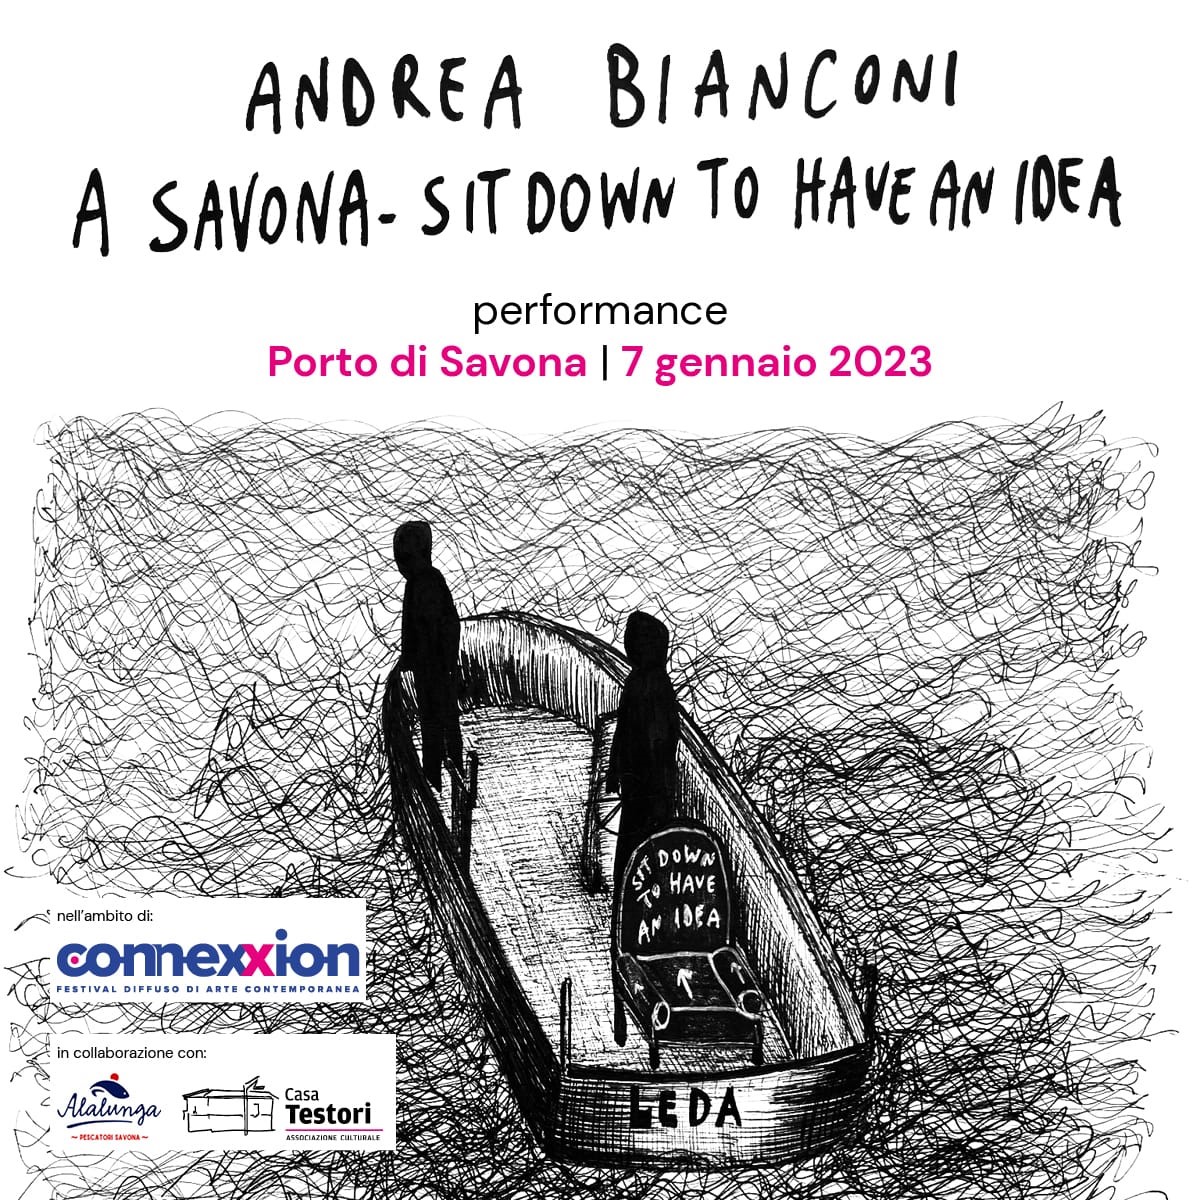 Andrea Bianconi - Sit Down to Have an Idea